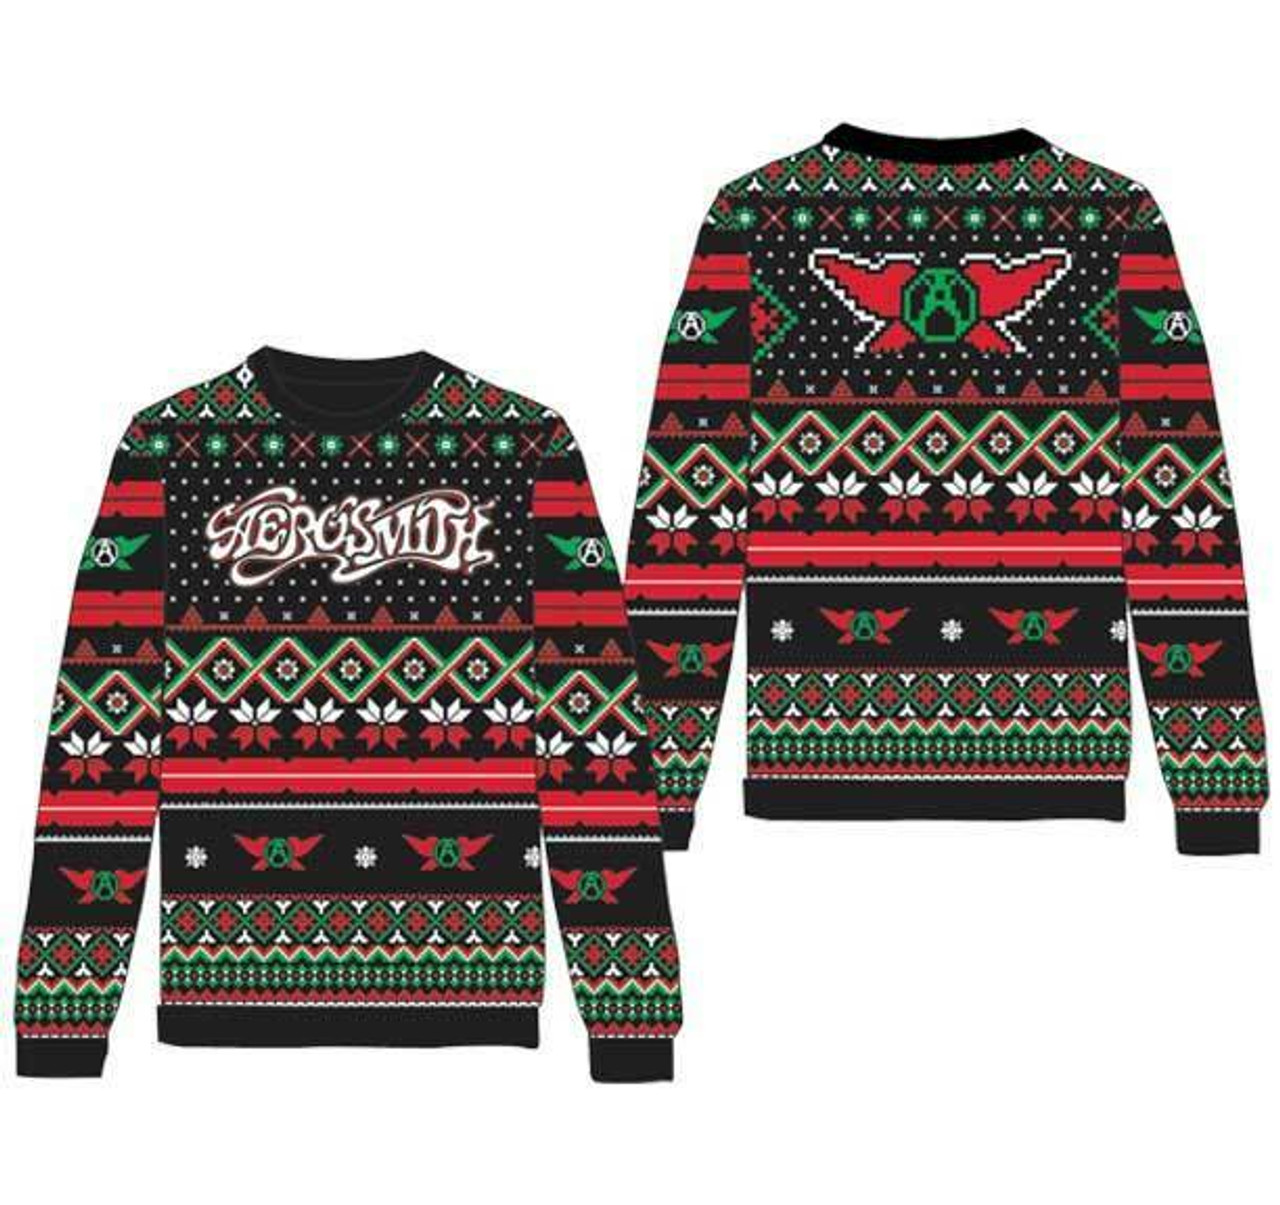 Aerosmith Rock and Roll Holiday - Ugly Apparel Christmas Band Music Sweater Fearless 838440093